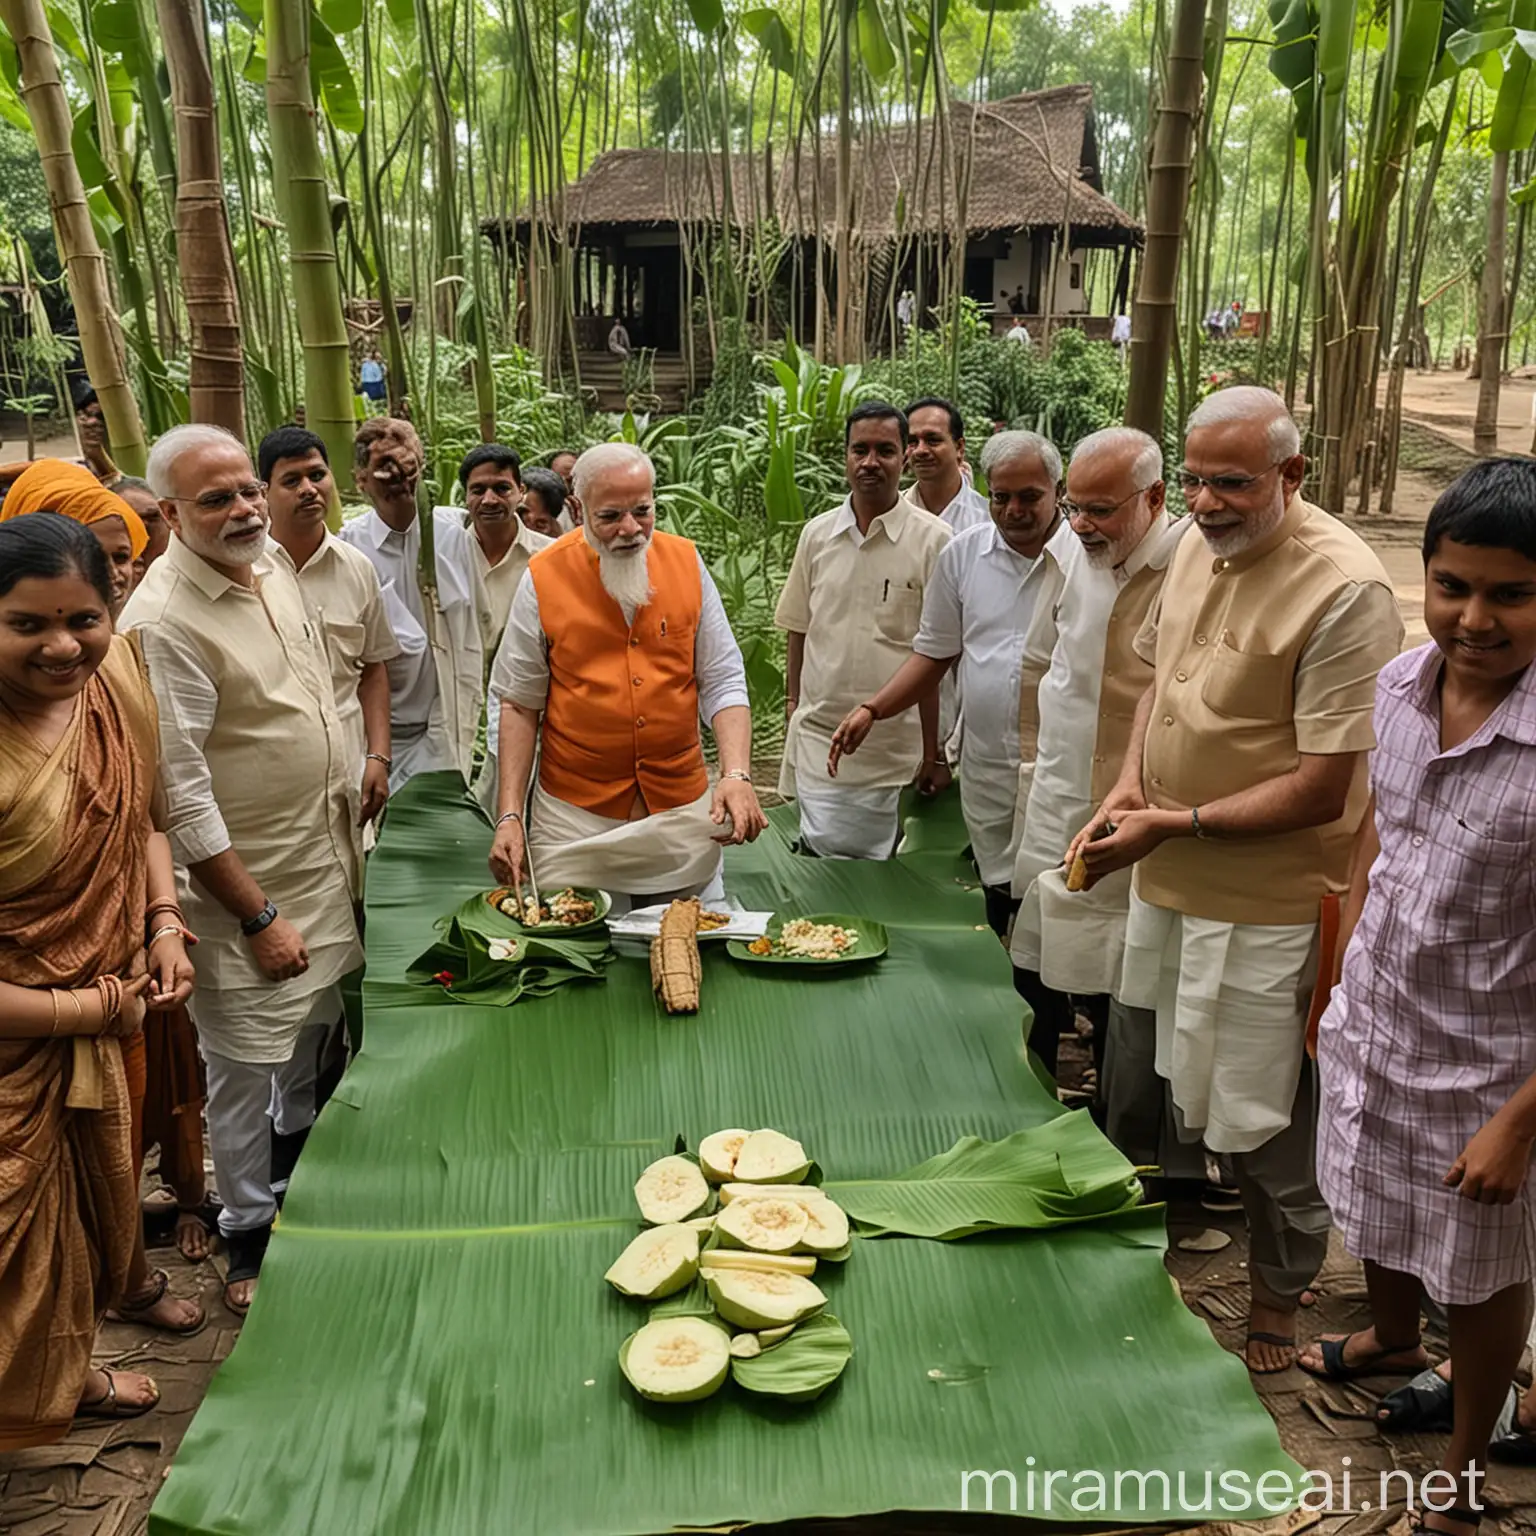 Narendra Modi Enjoying Traditional South Indian Meal on Banana Leaf at Temple